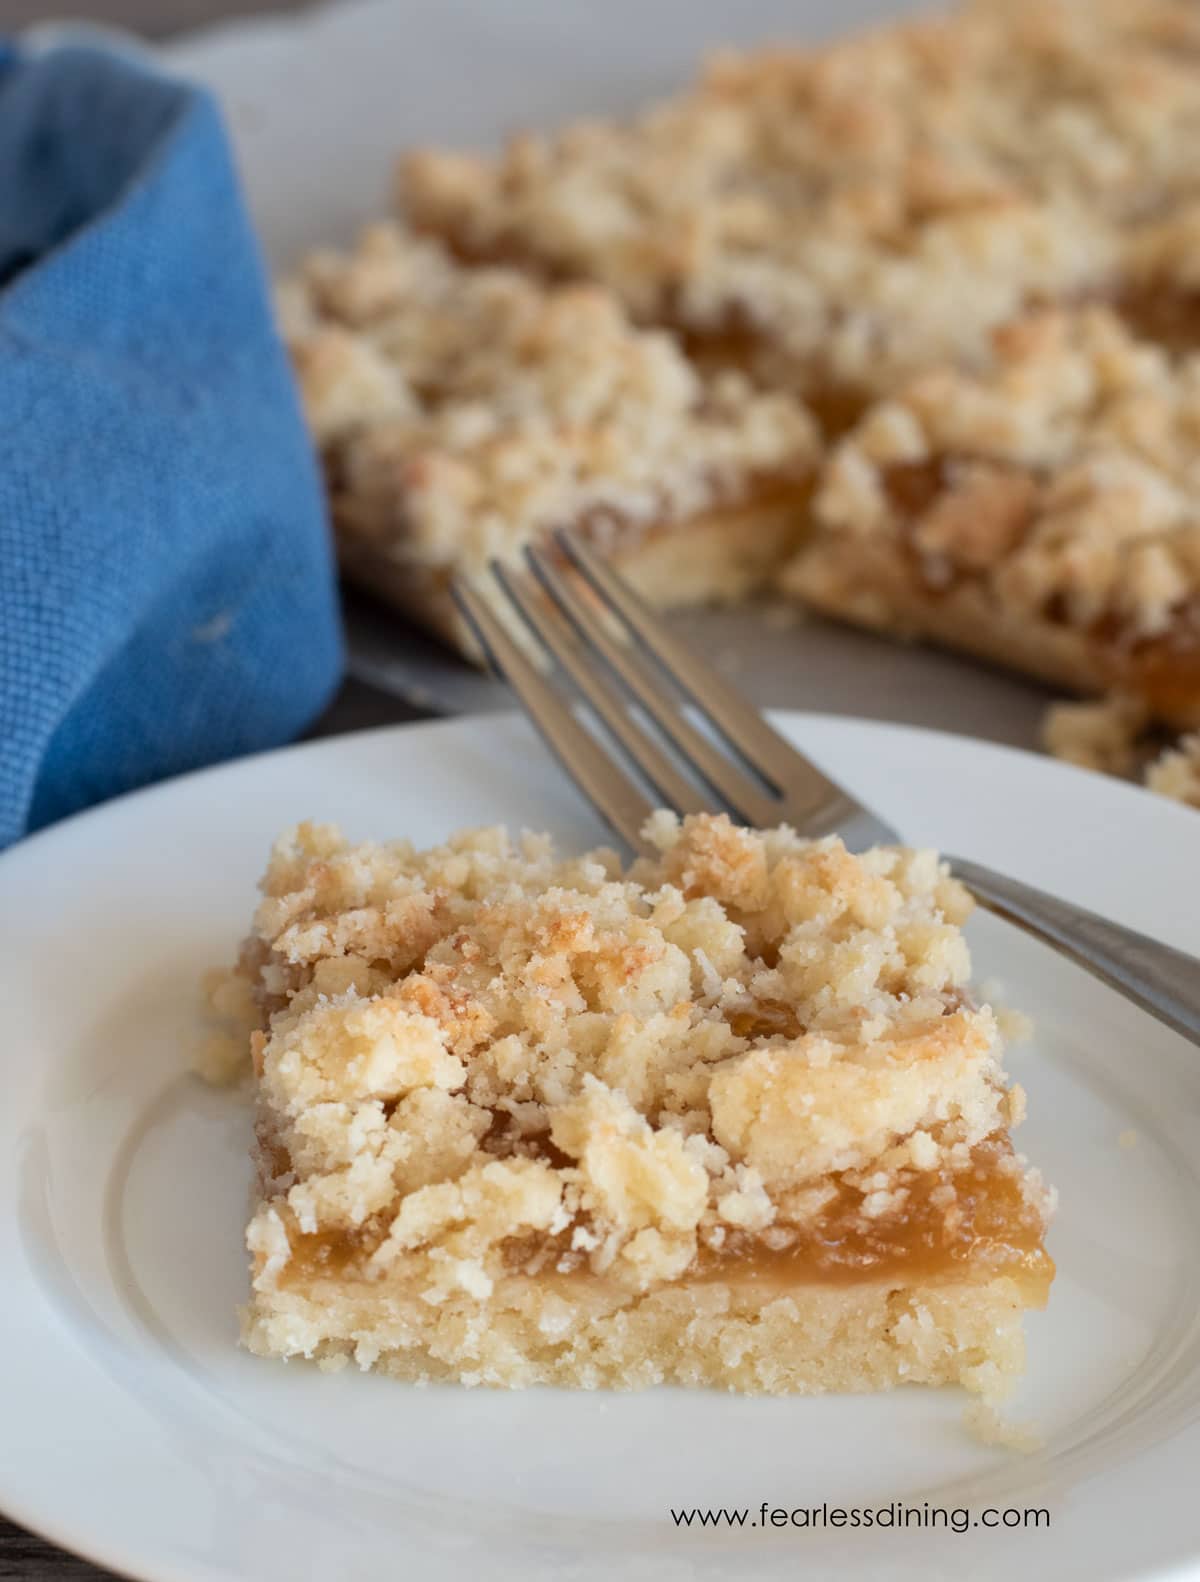 A slice of gluten free apricot bars on a plate.